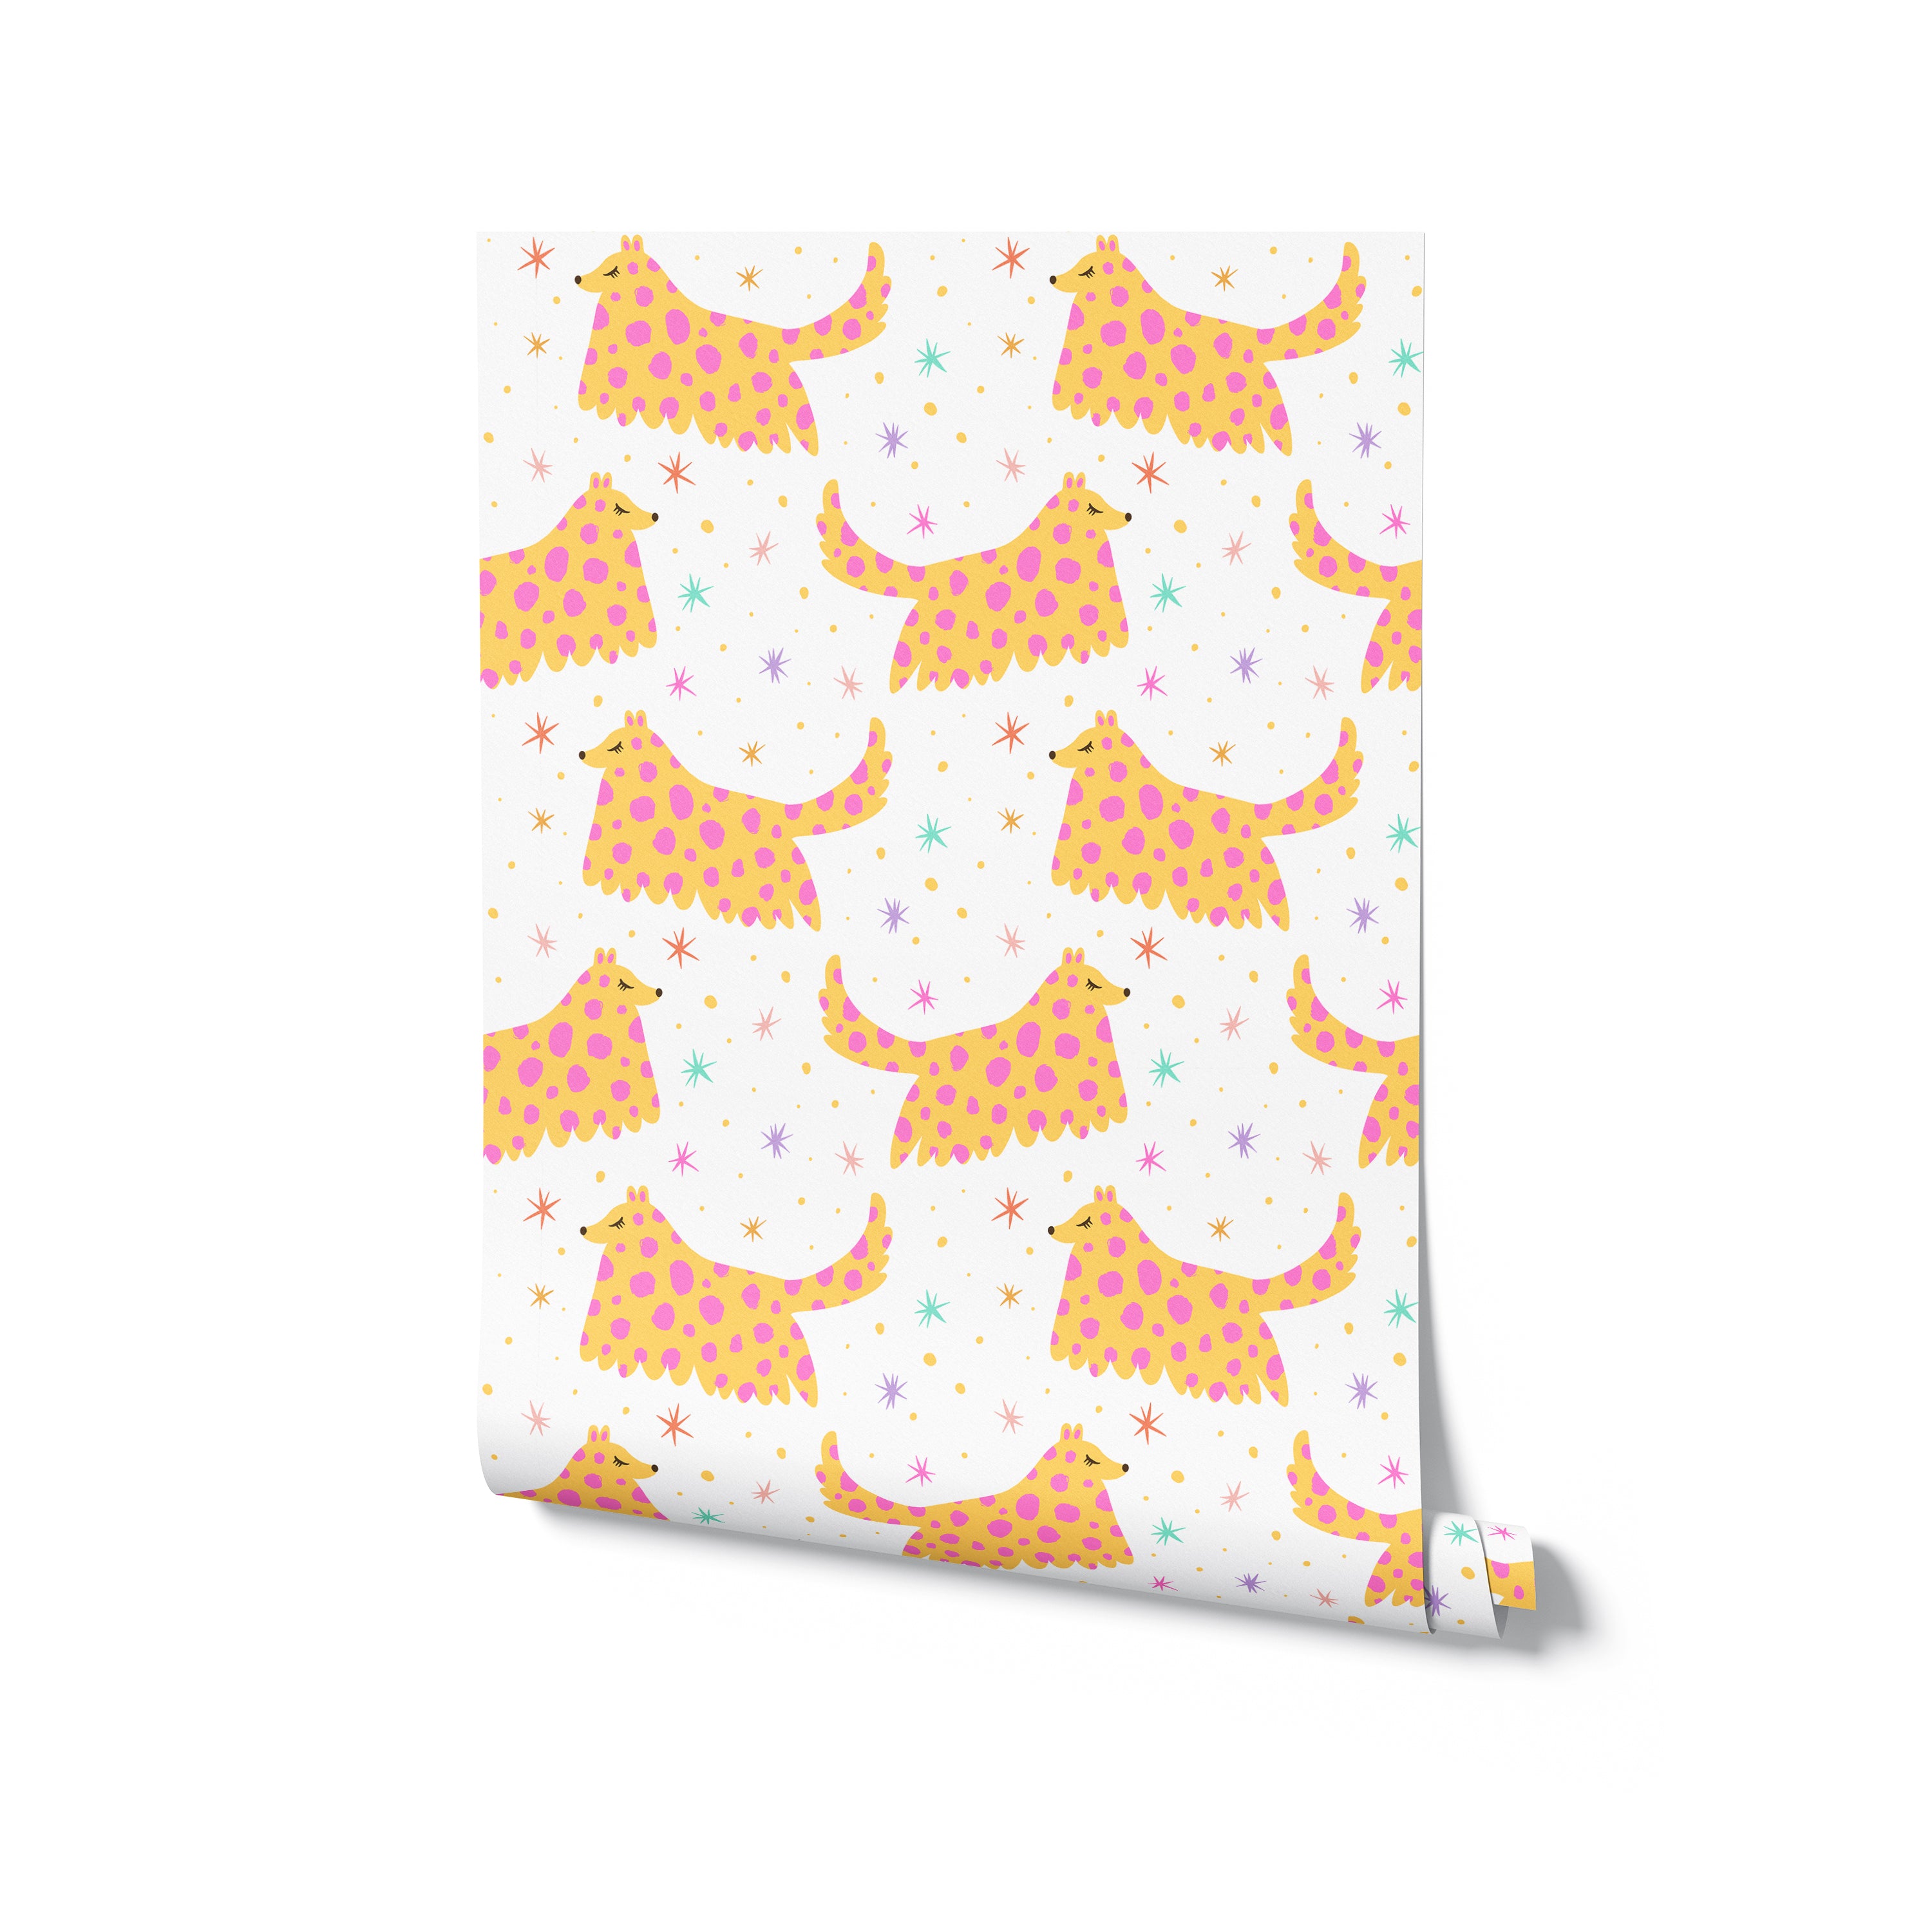 A roll of 'Dog Wallpaper 35' showing a fun and colorful design of pink and yellow spotted dogs on a white background, interspersed with colorful stars and dots, ideal for playful interior spaces